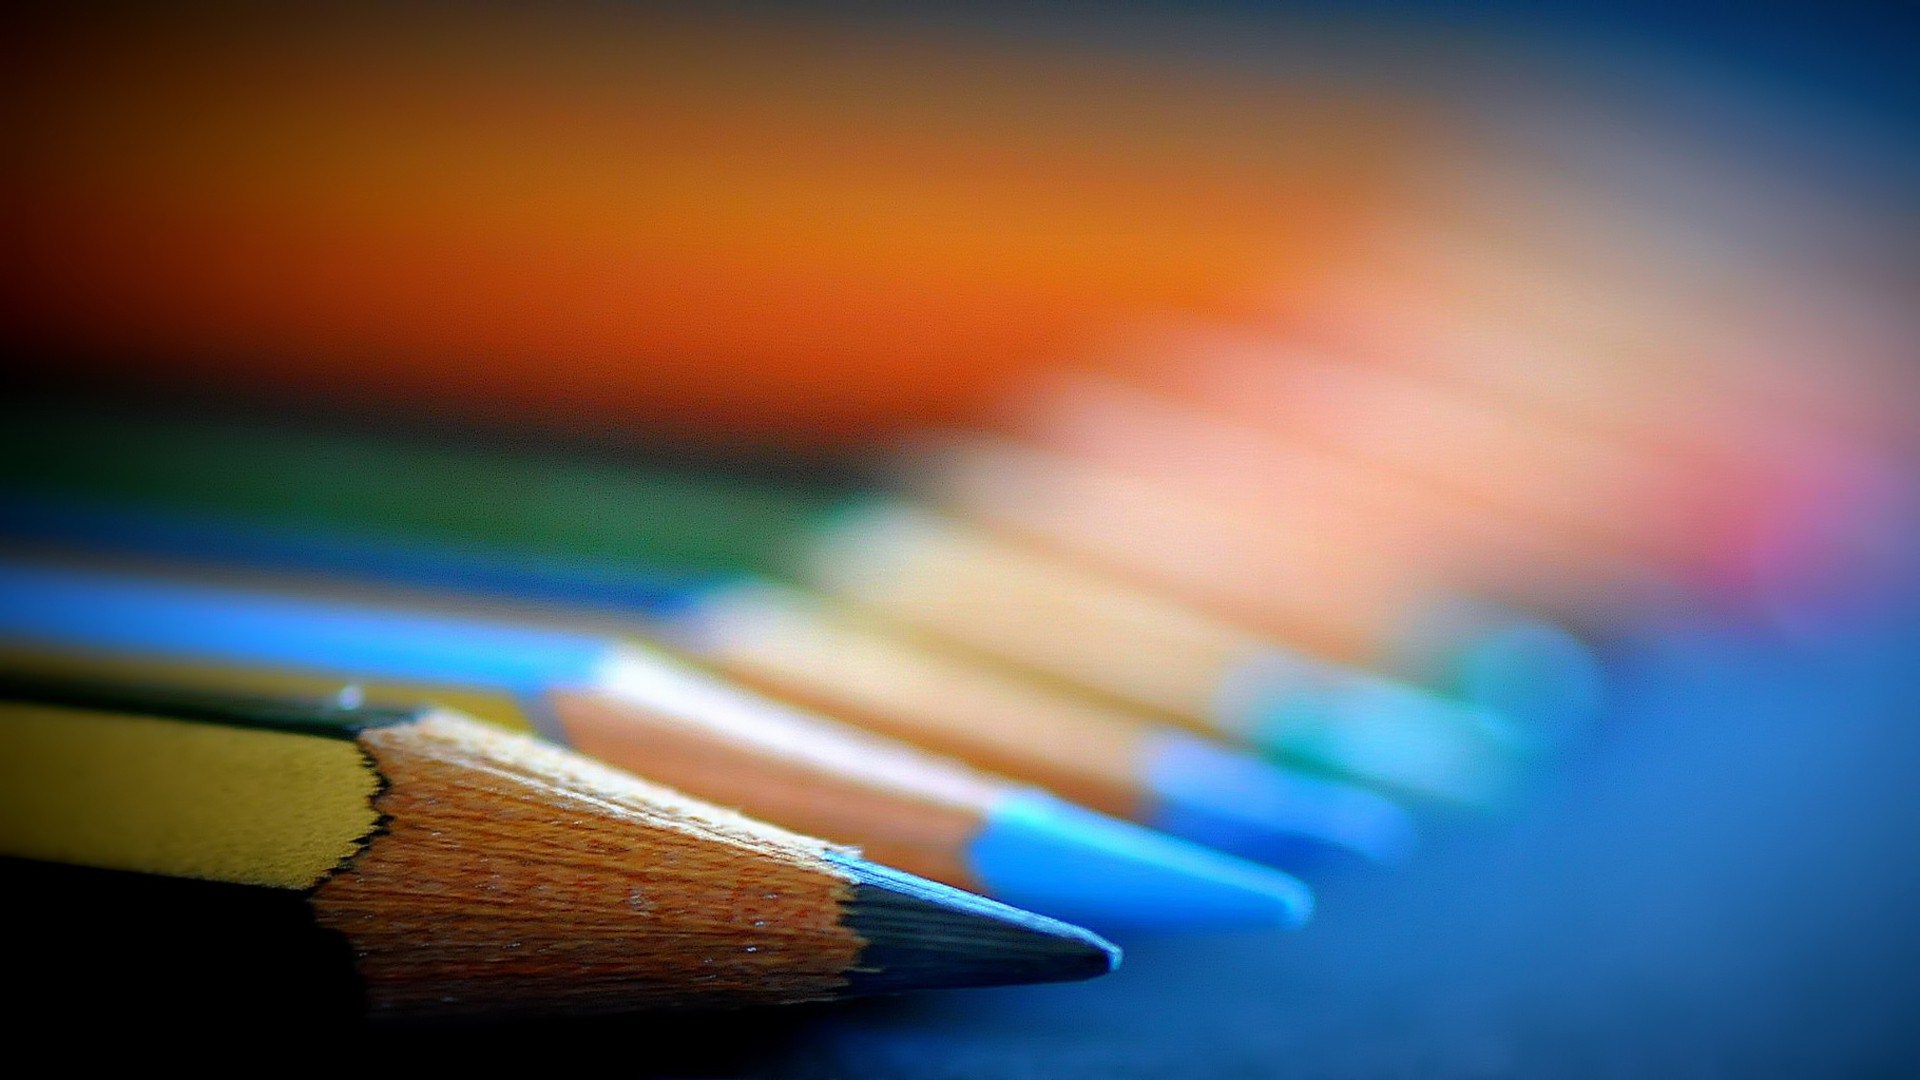 pencil Full HD Wallpaper and Background Image 1920x1080